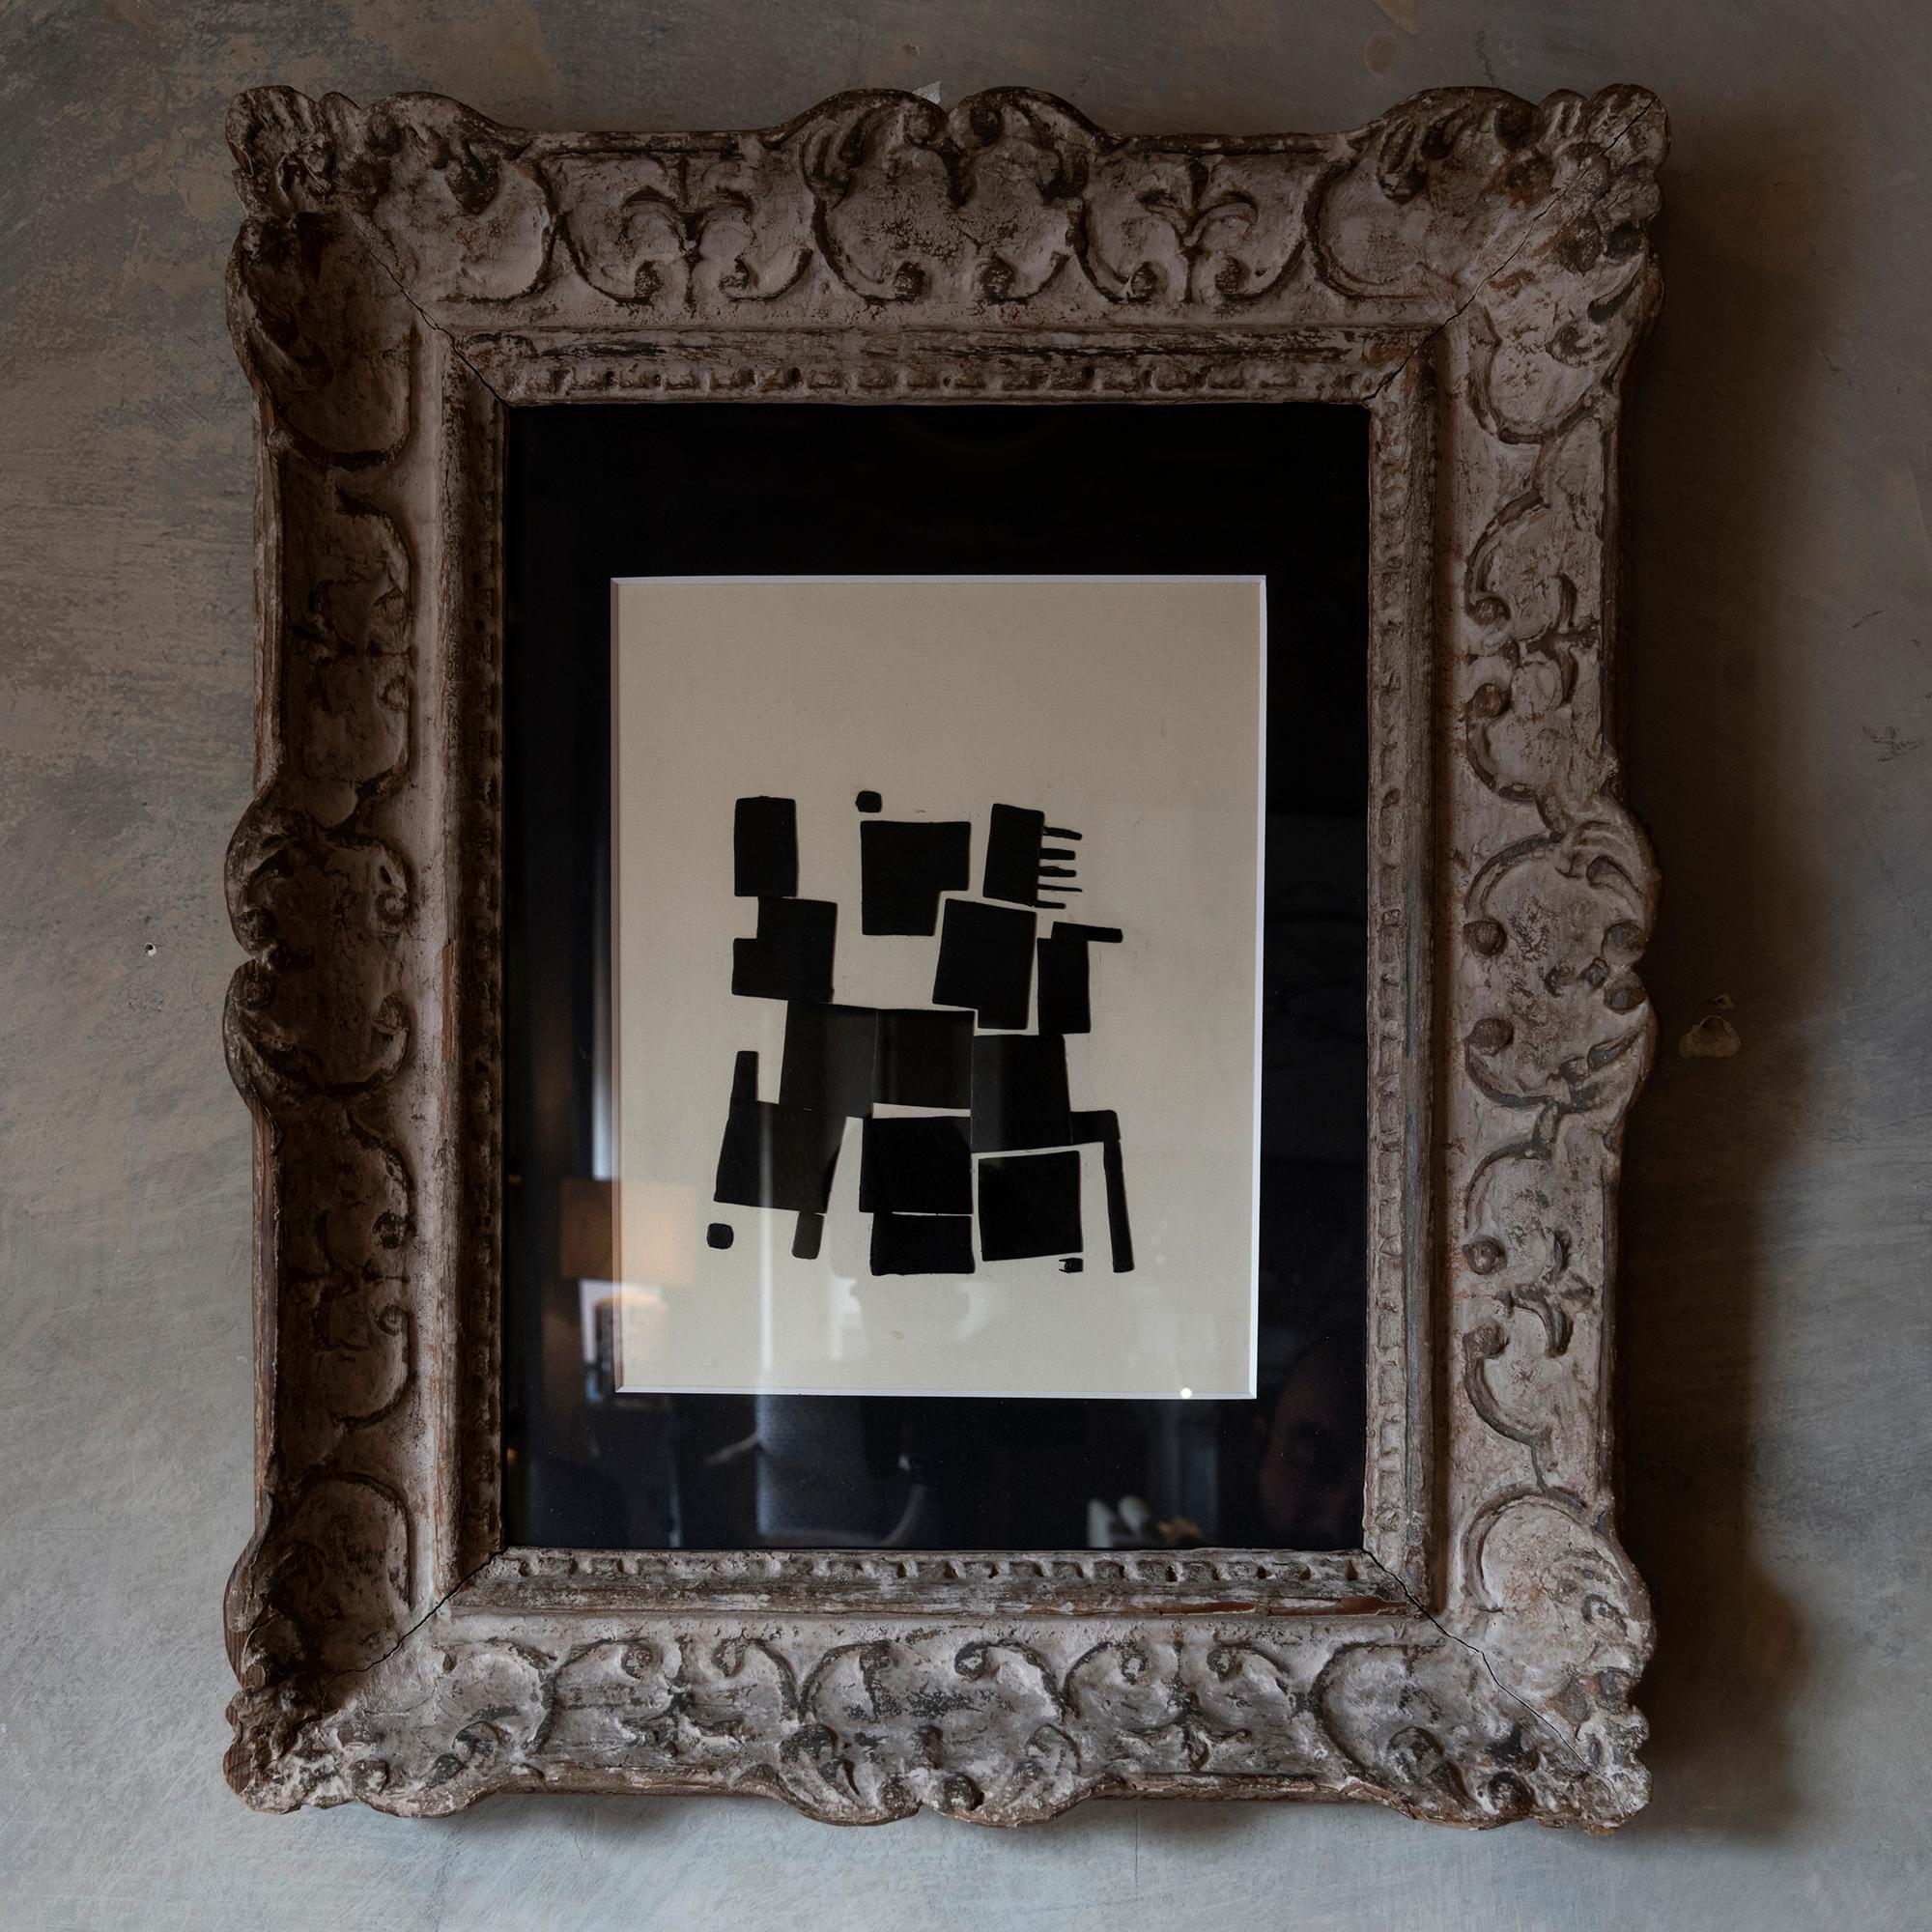 Contemporary black on white paper collage framed in a white patined wood vintage frame under glass. Italy 2022